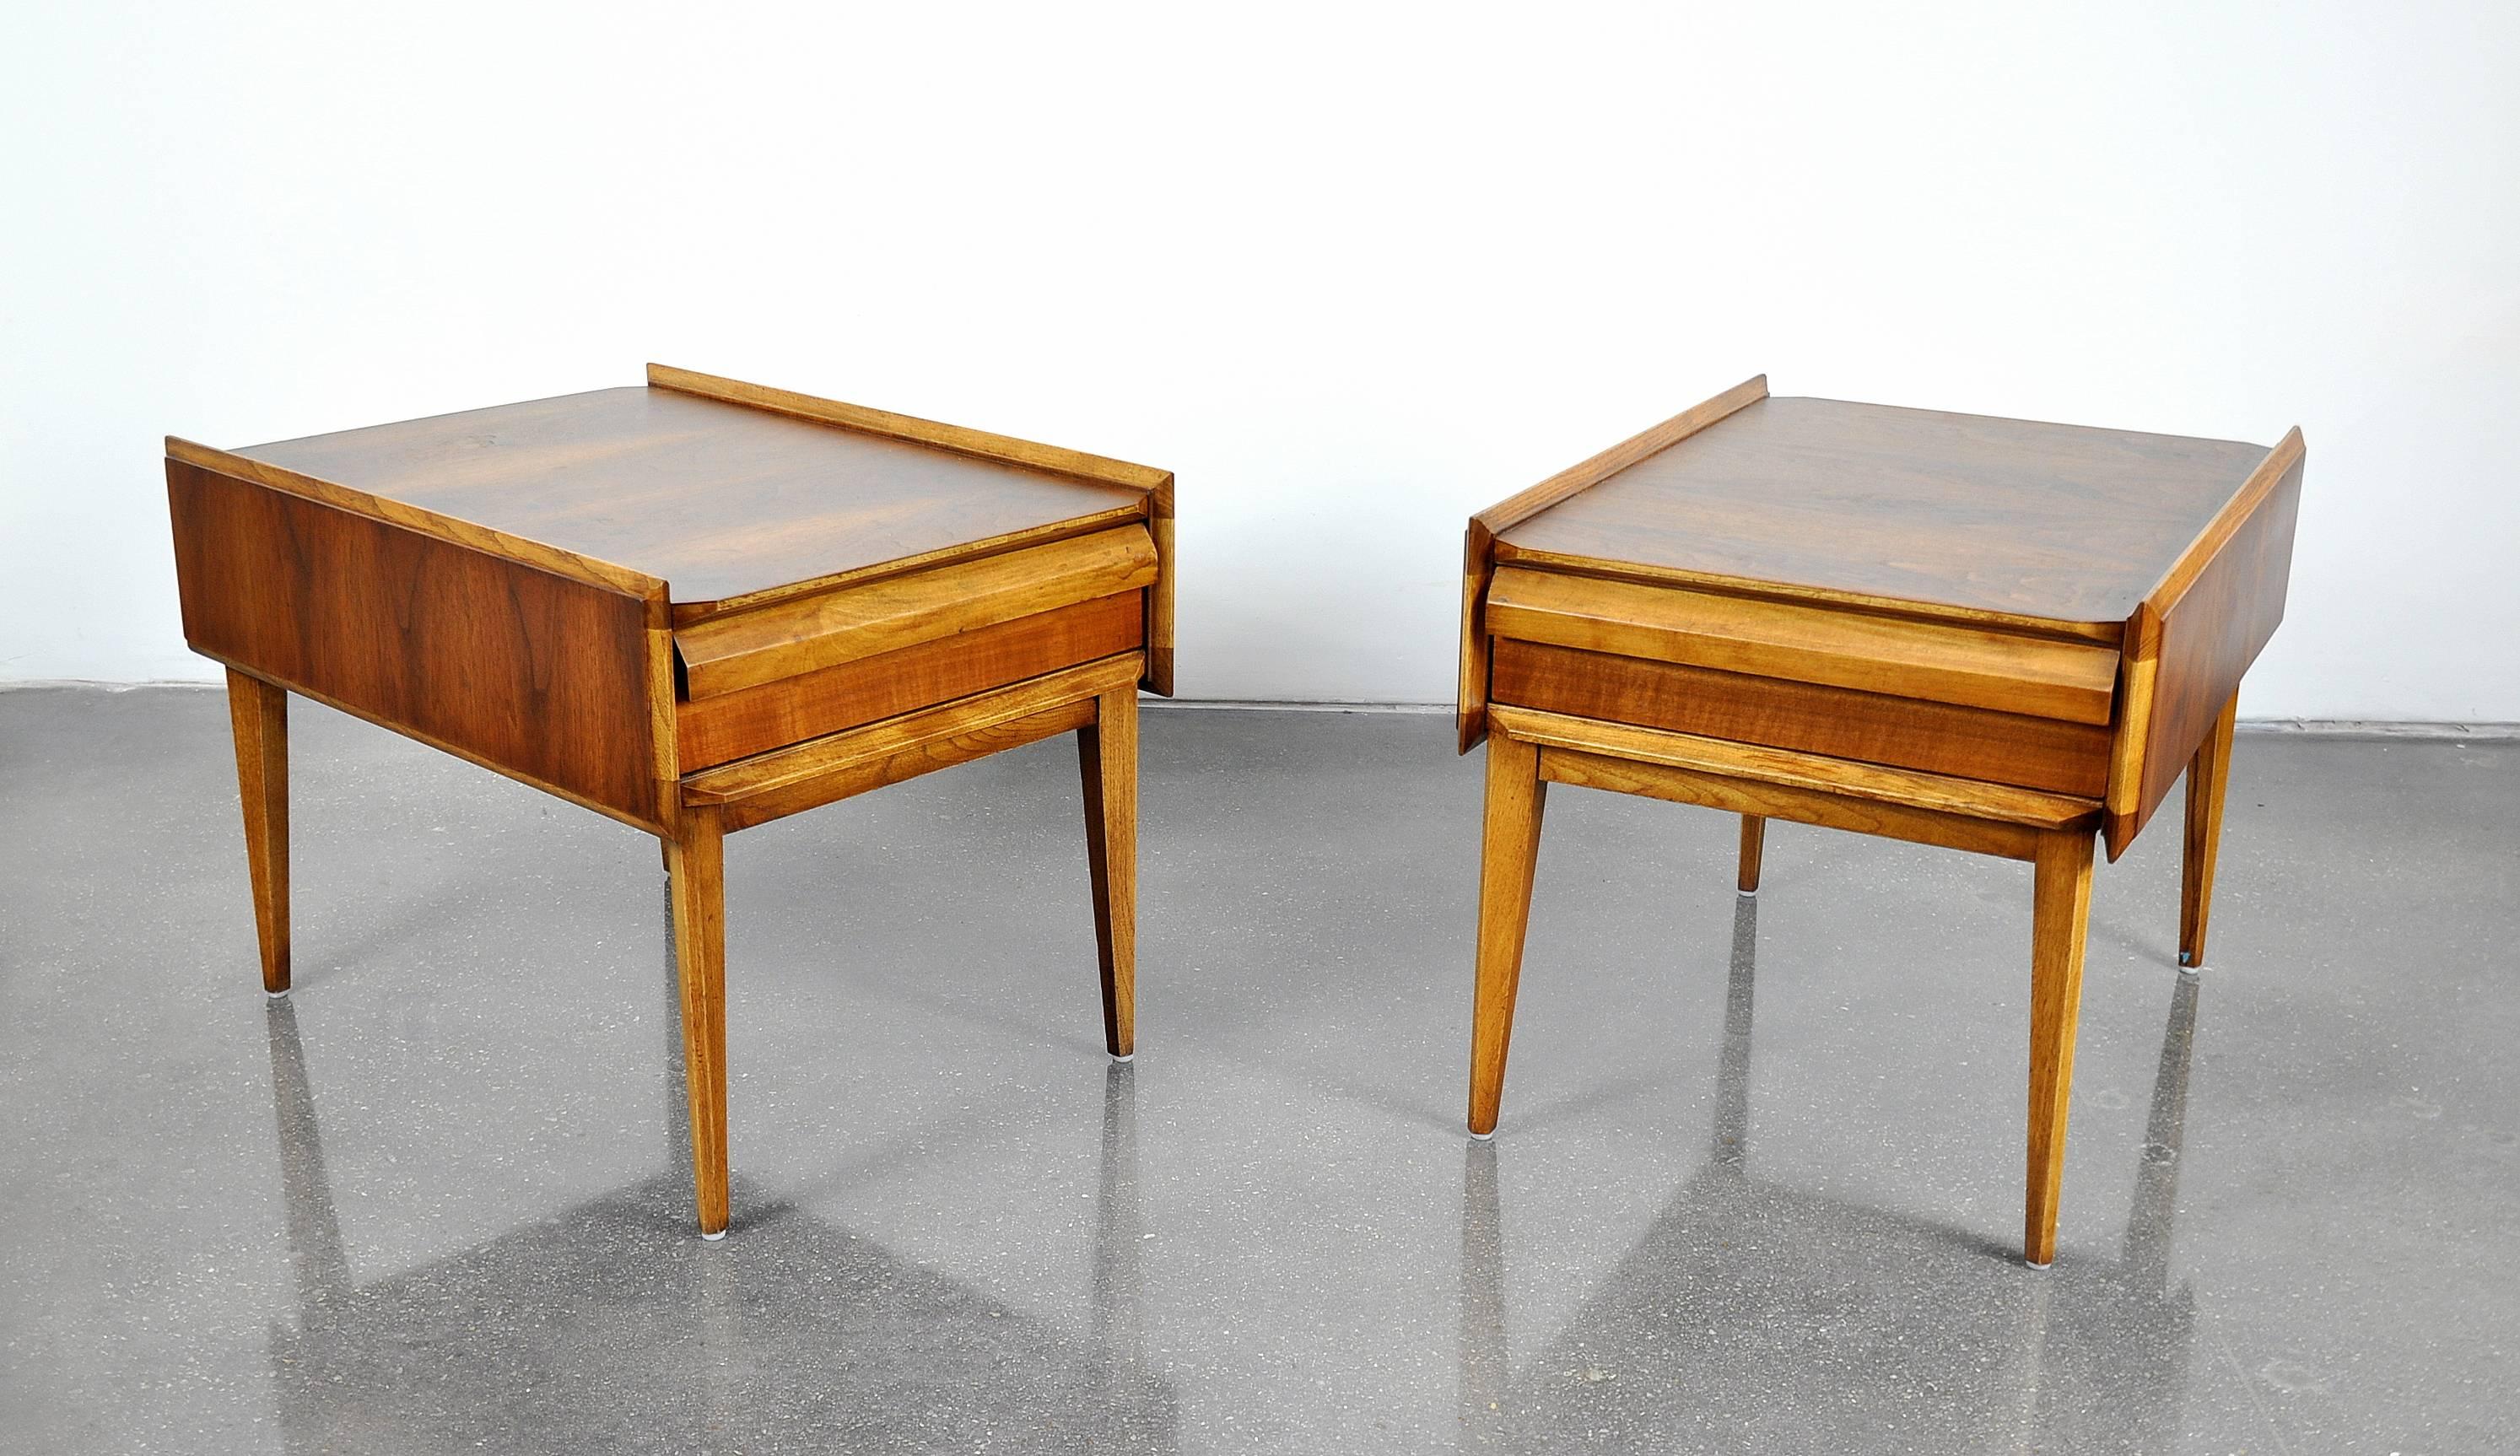 A great pair of Mid-Century Modern end tables from the very hard to find First Edition collection manufactured by Lane Furniture, Altavista in the 1950s. The walnut and pecan occasional tables feature a drawer with a sculpted louvered integrated